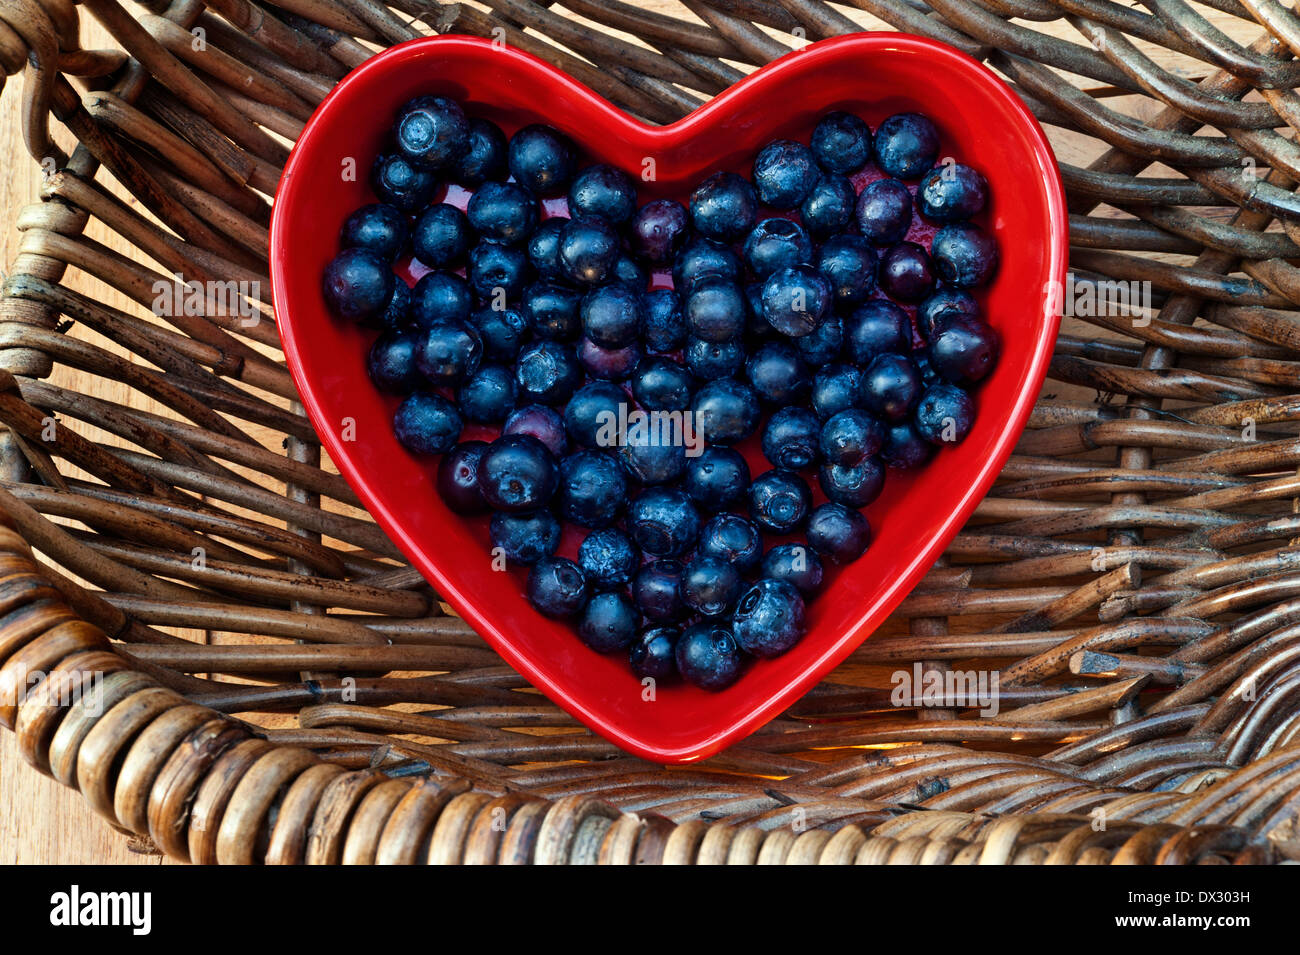 BLUEBERRIES HEART Healthy heart concept / Blueberries in a red heart shaped dish in a traditional wicker basket Stock Photo